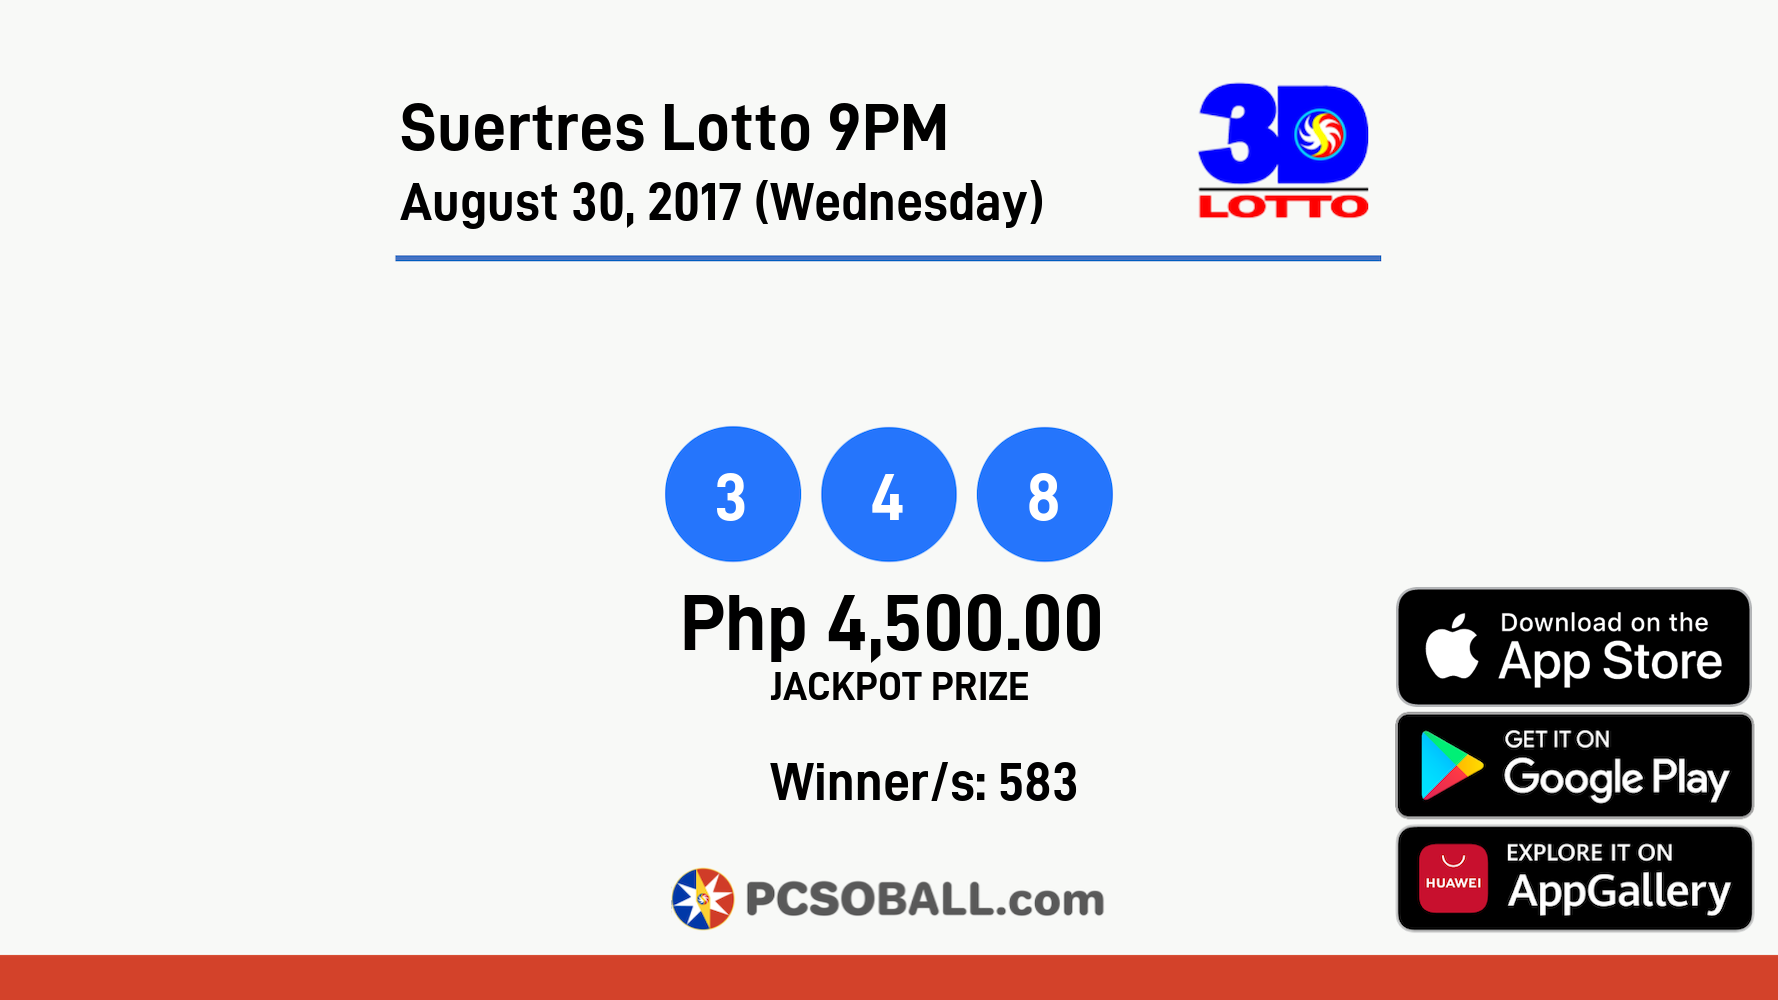 Suertres Lotto 9PM August 30, 2017 (Wednesday) Result